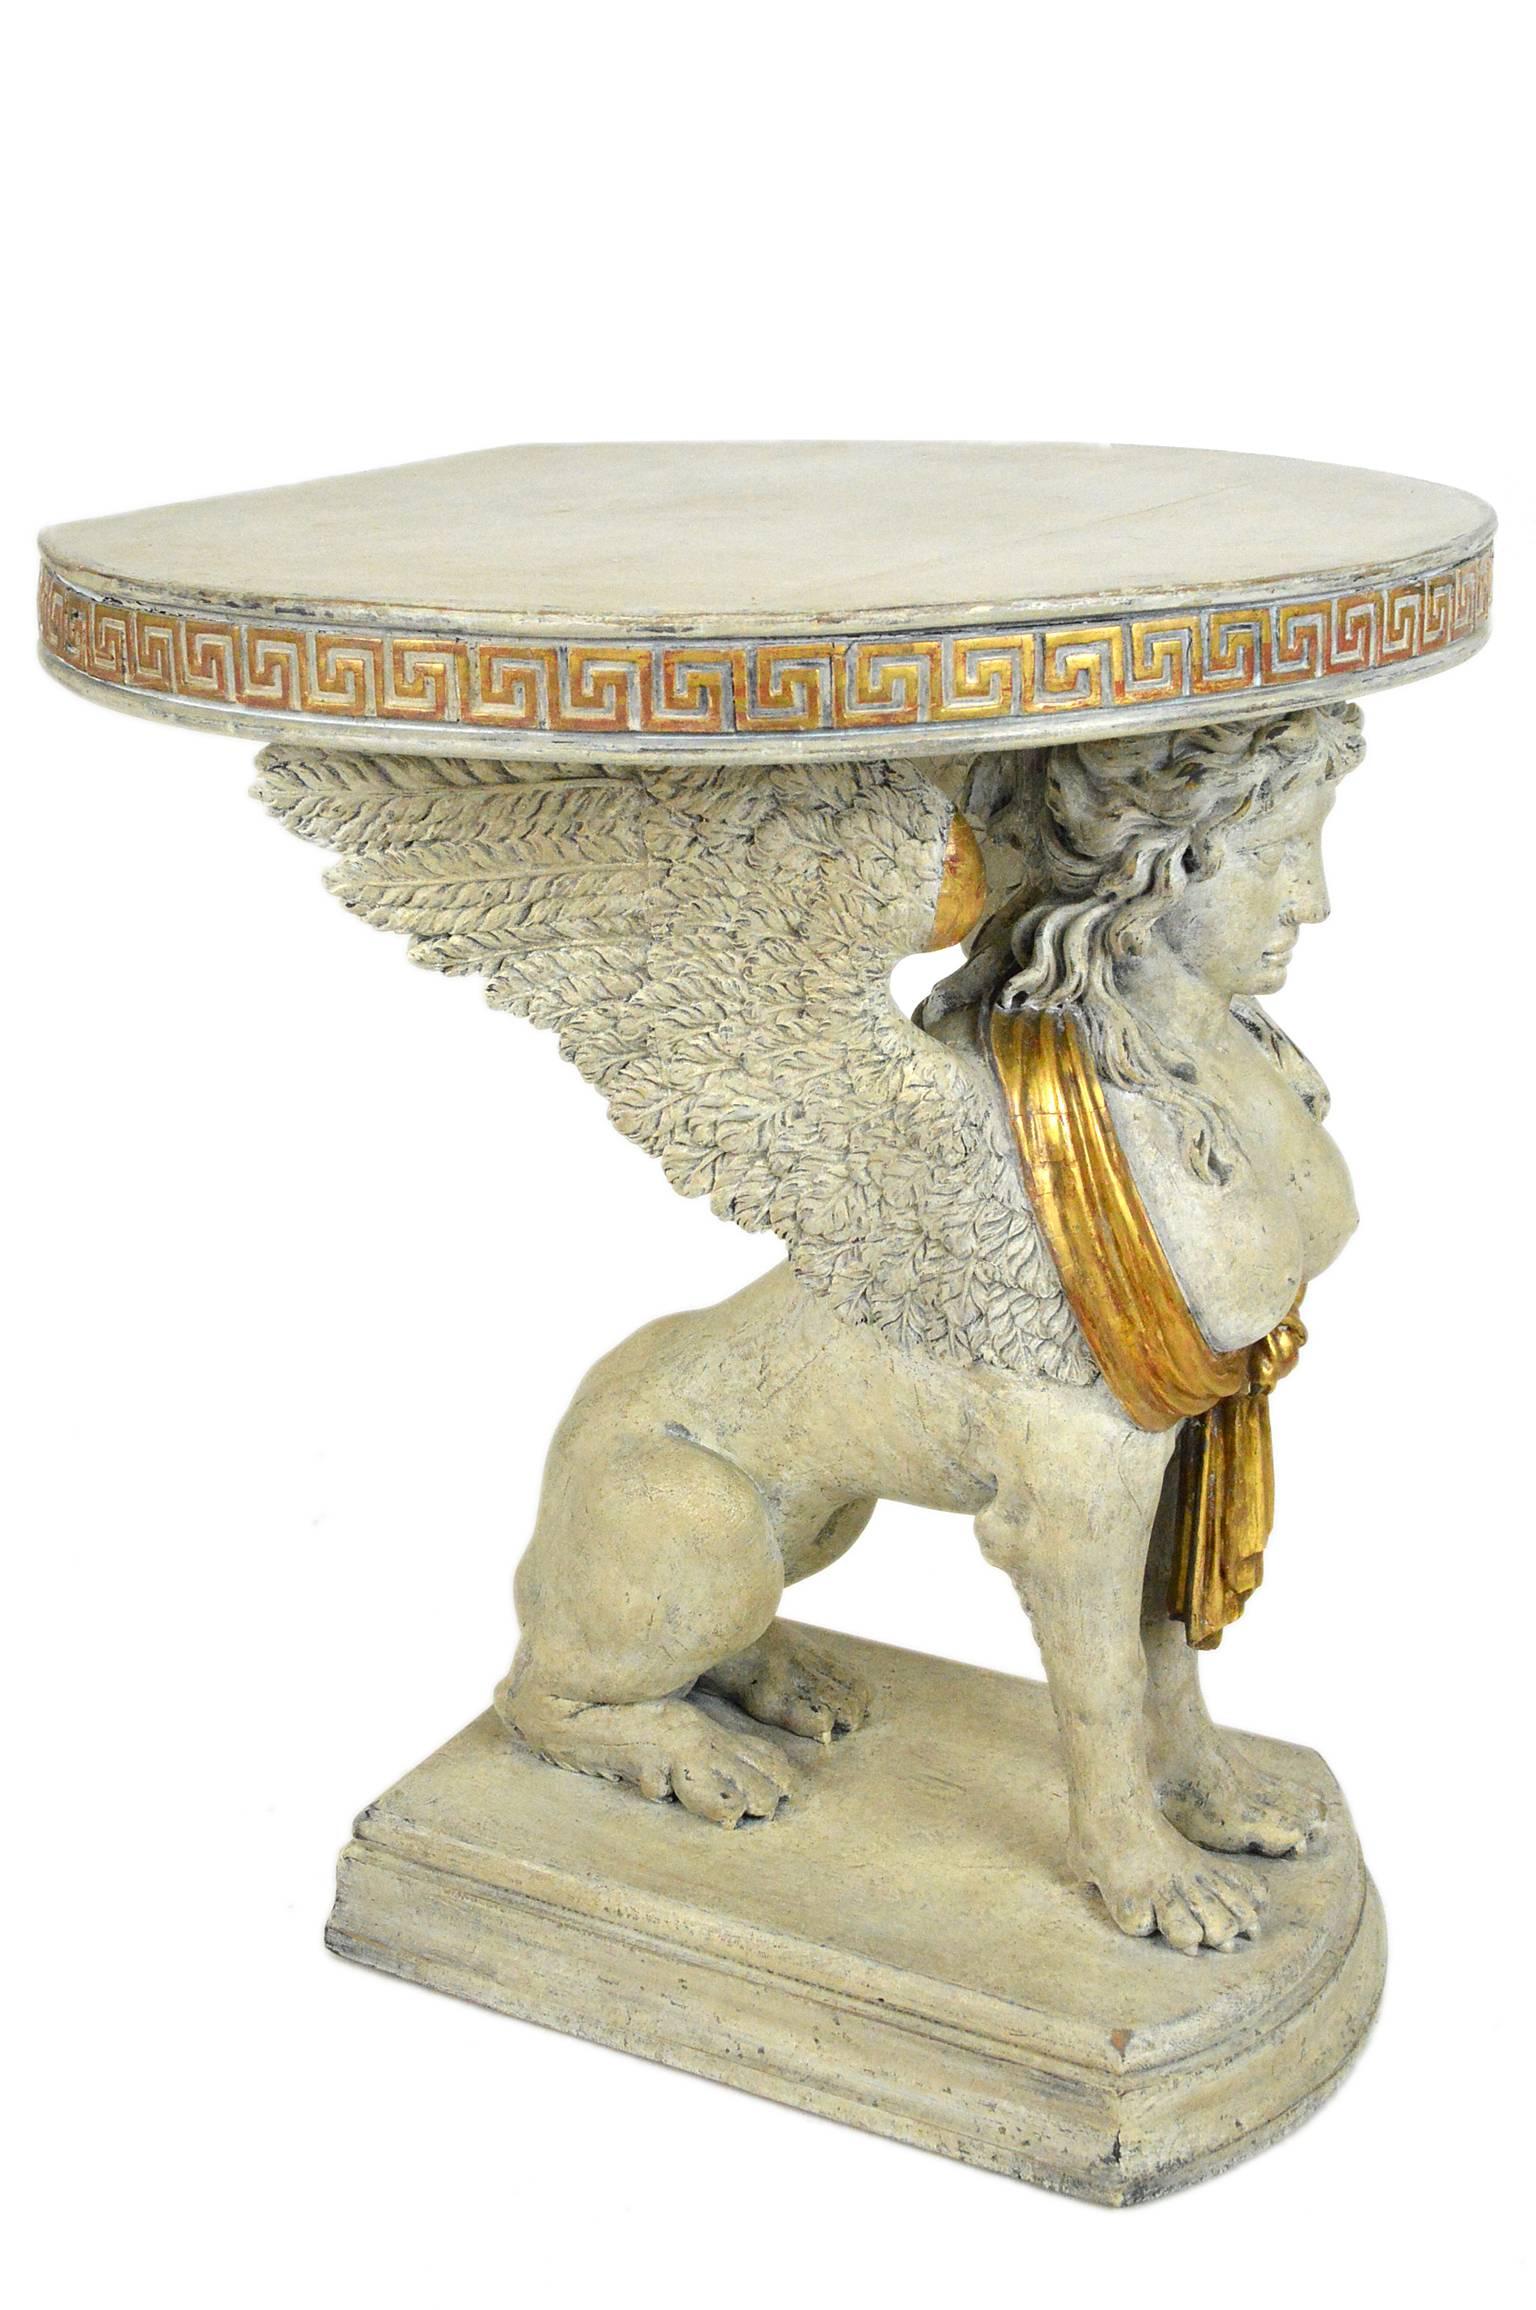 19th century French neoclassical style side table with painted and giltwood finish.